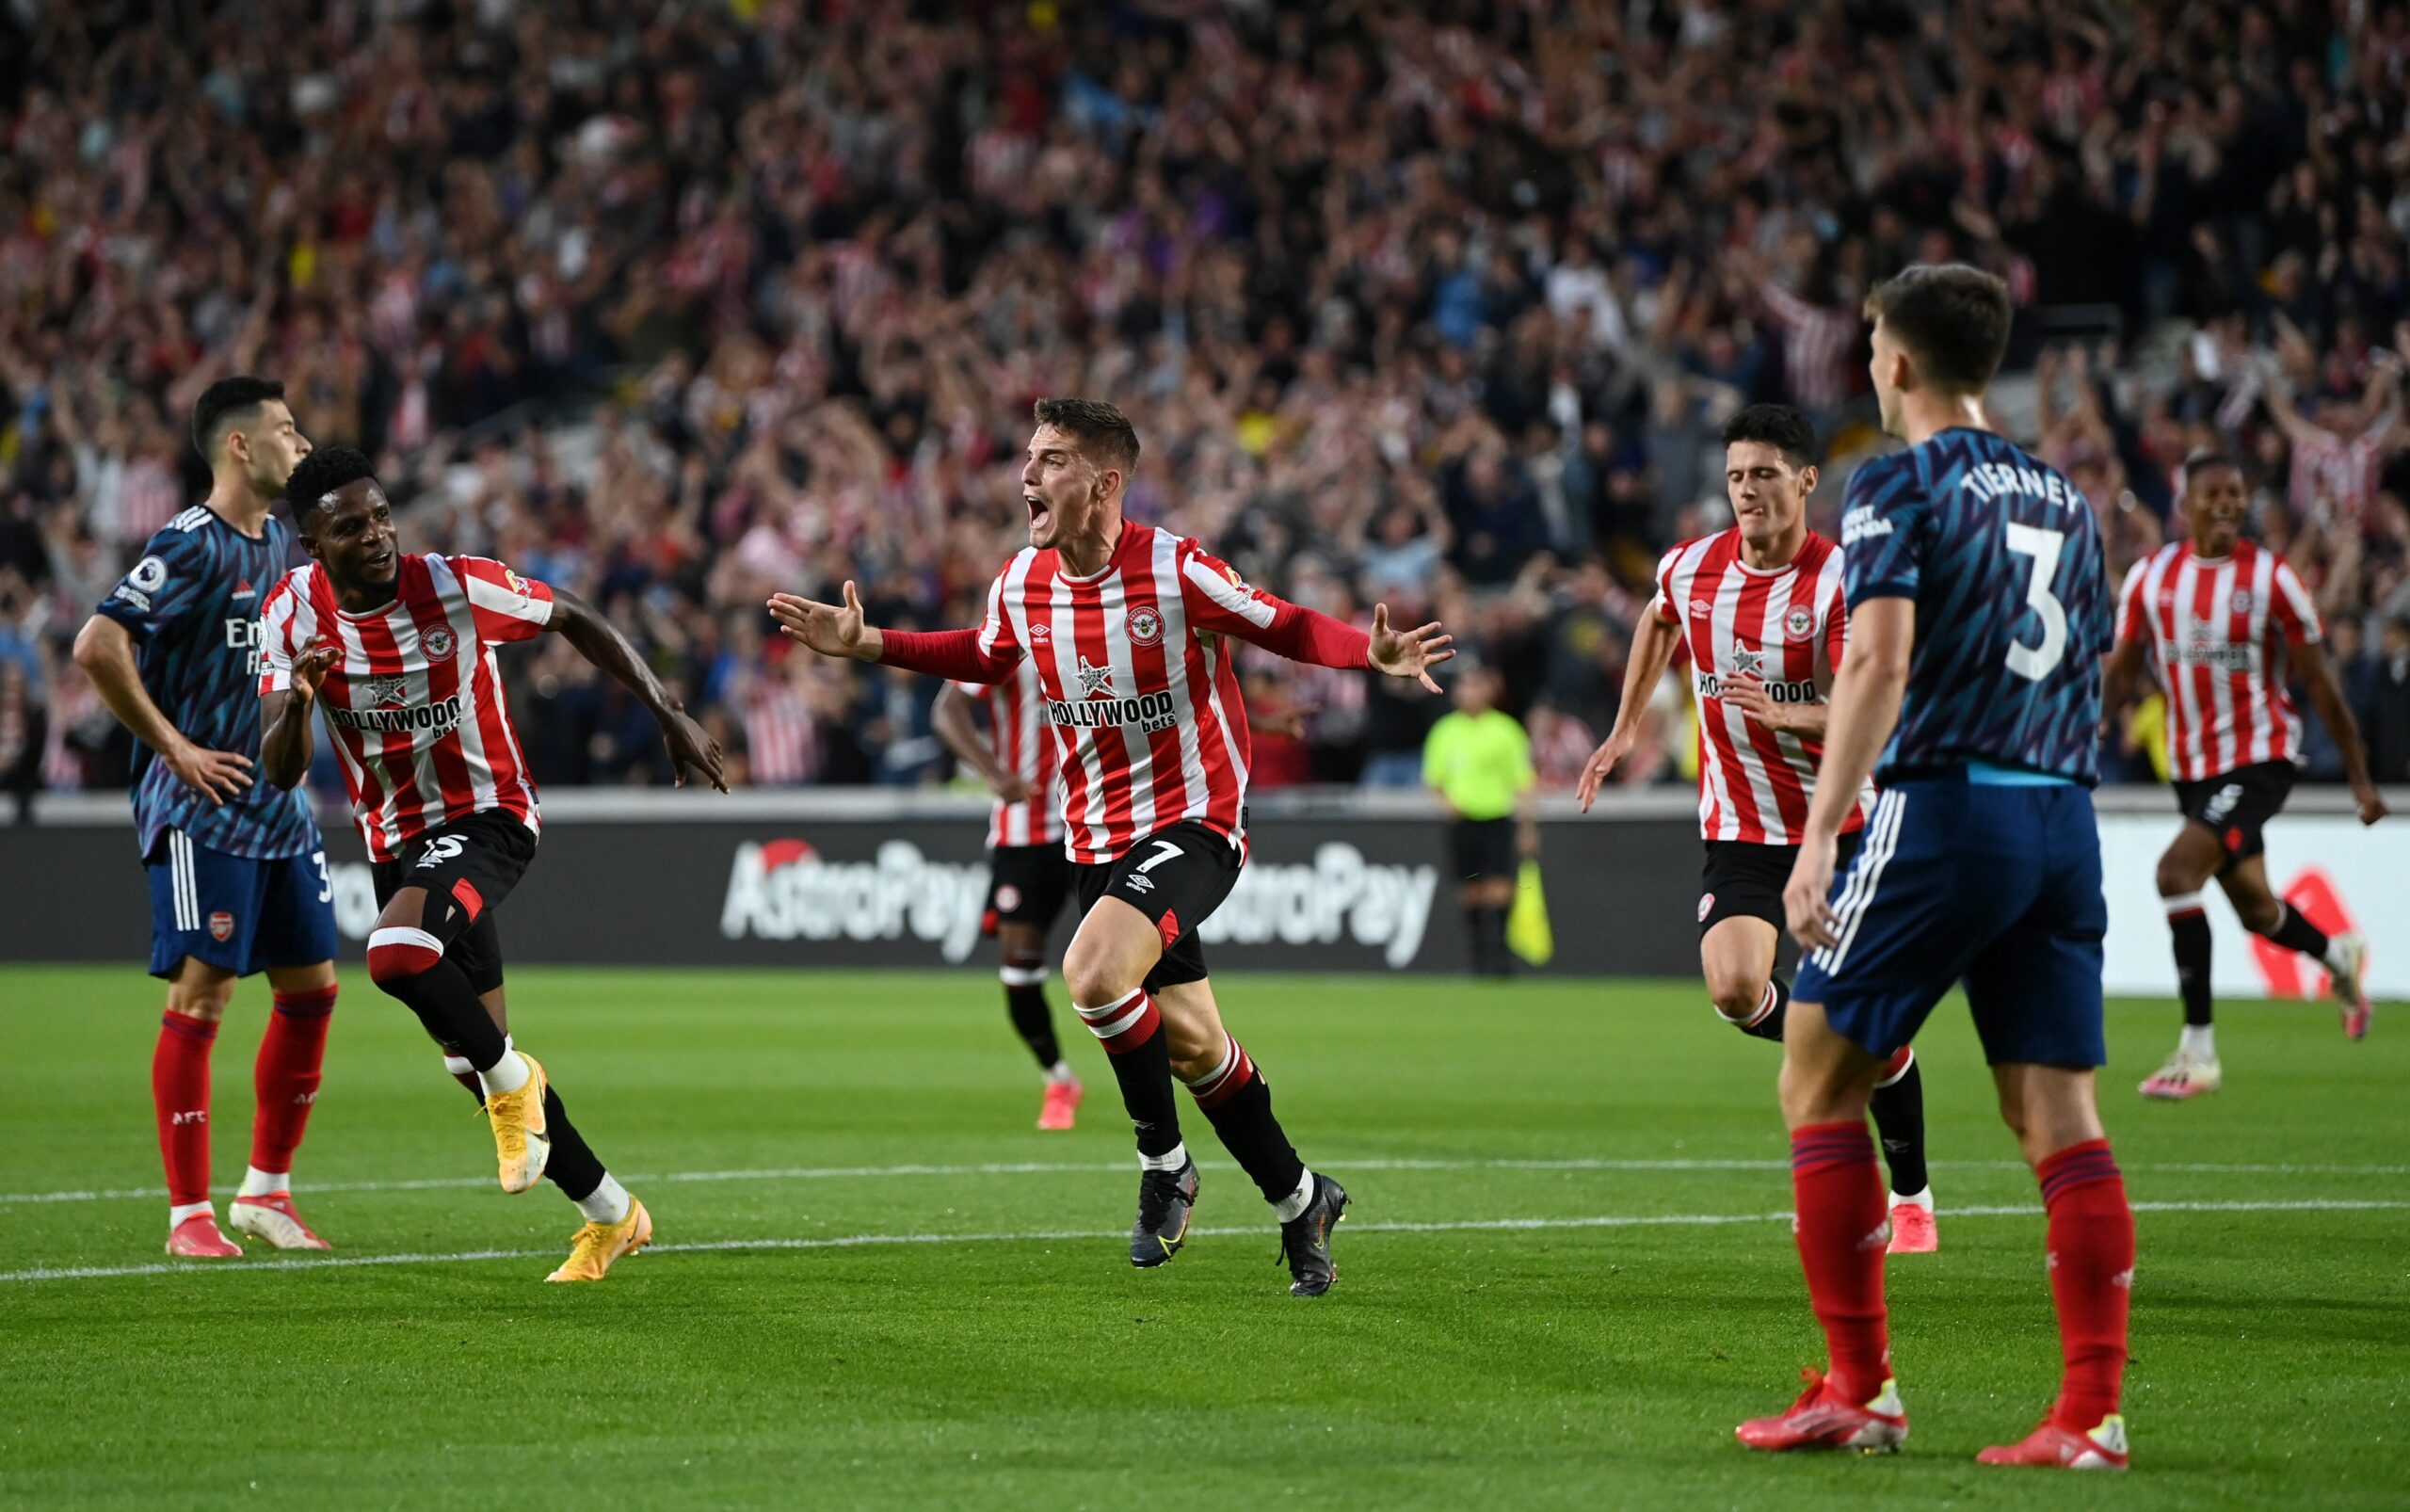 Brentford overpower Arsenal for first EPL win in 74 years